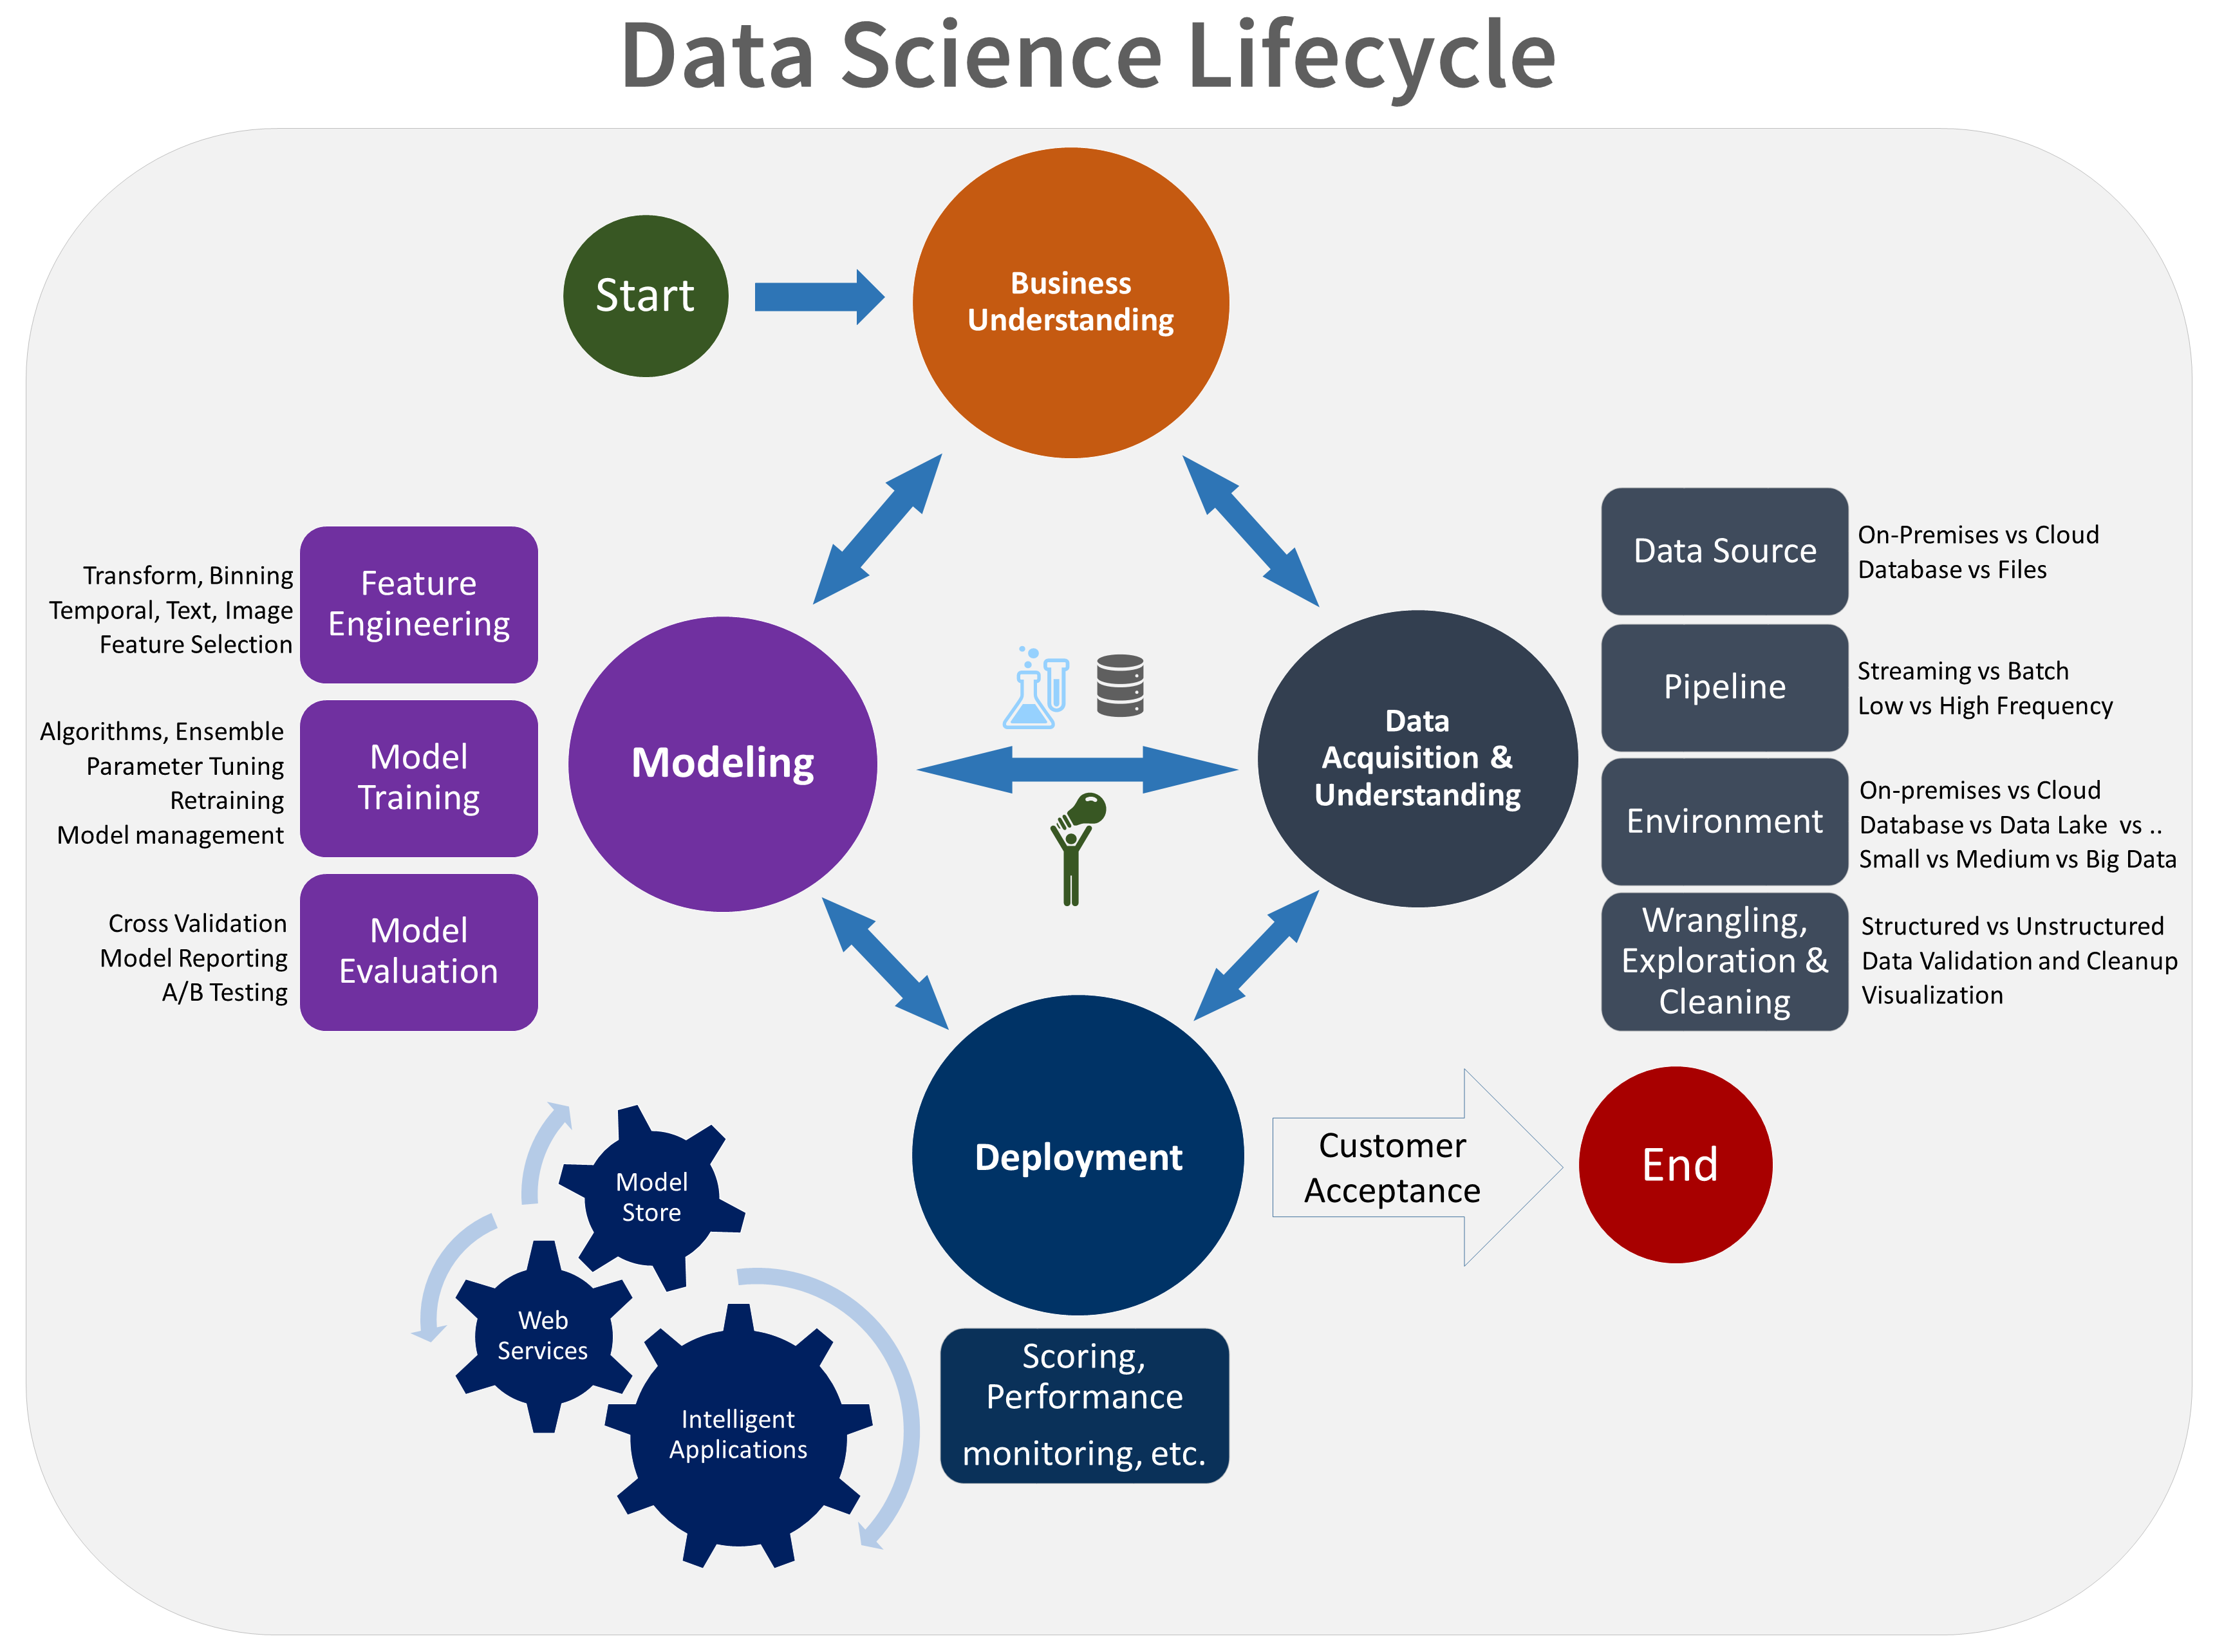 Life cycle of Data Science